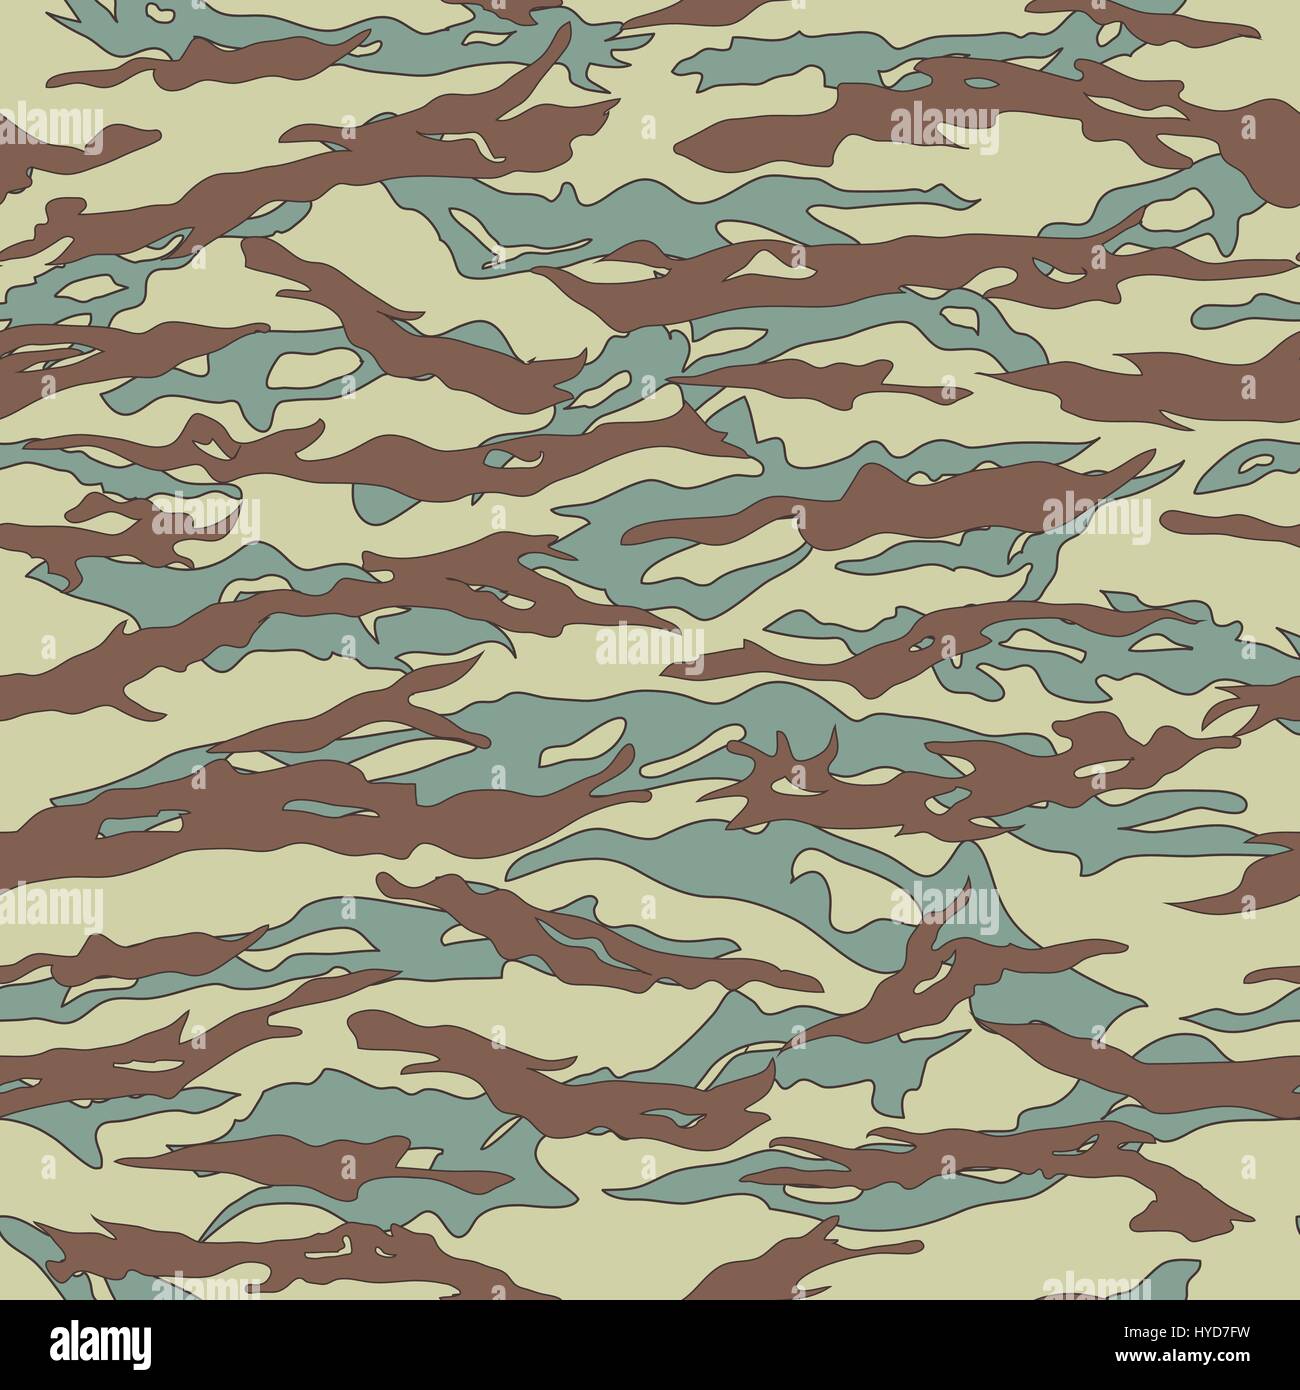 Russian Tiger stripe Camouflage seamless patterns Stock Vector